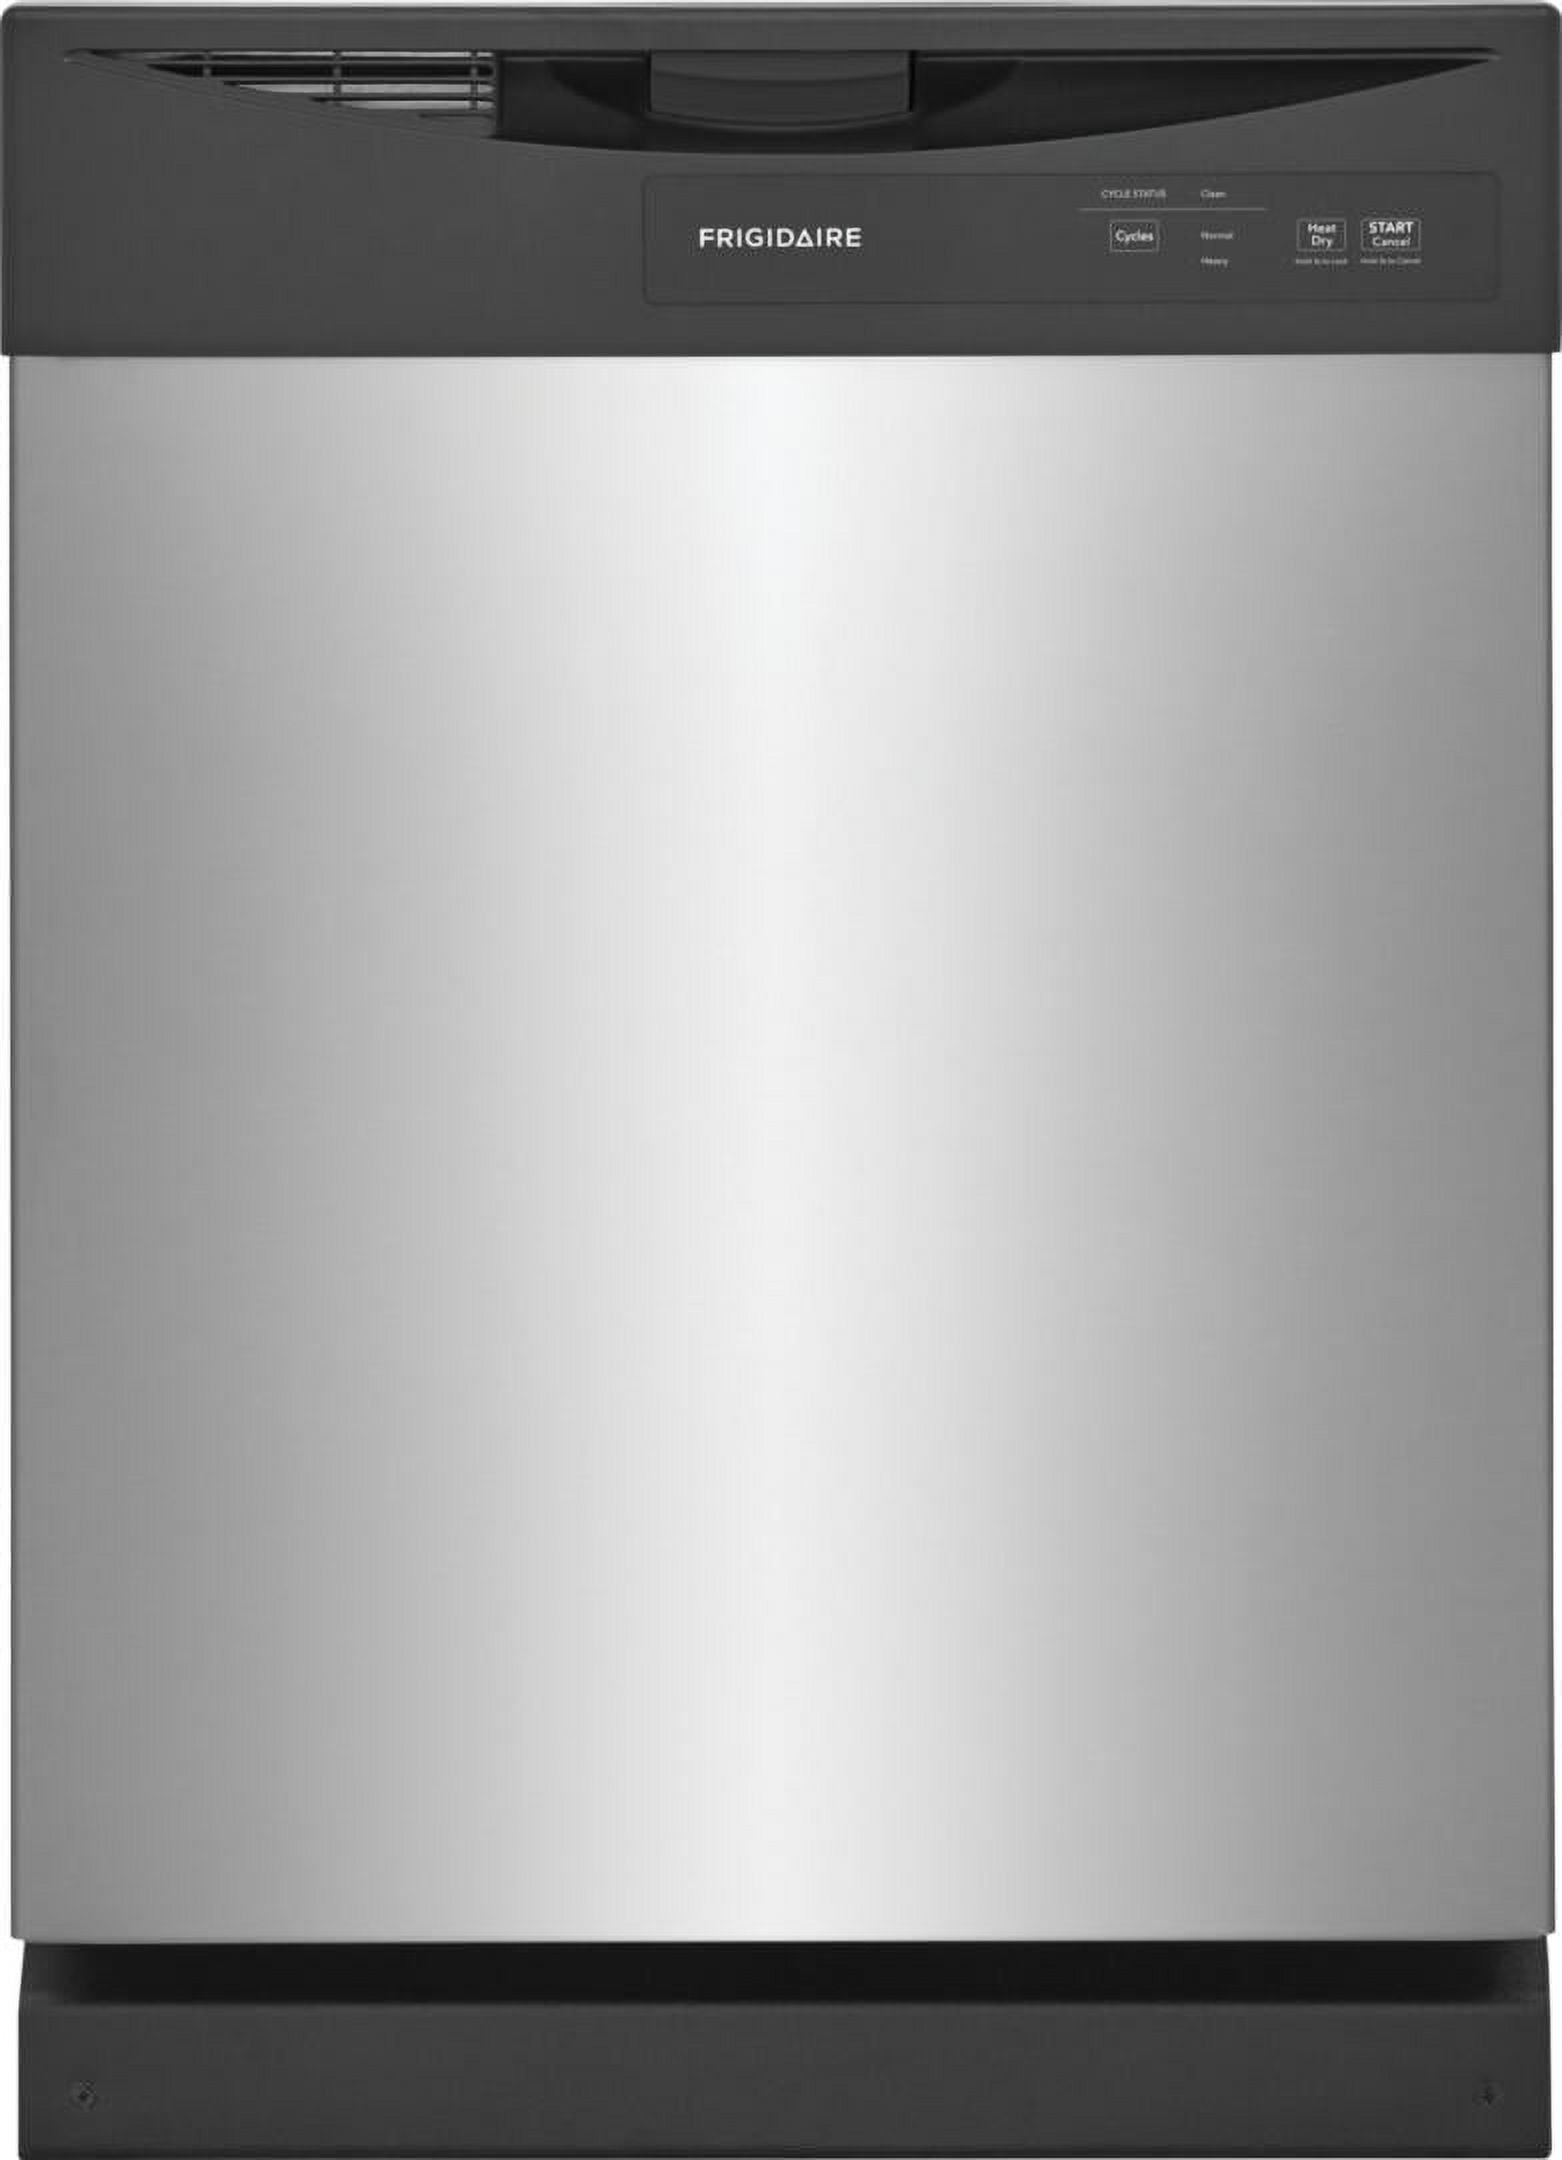 Frigidaire Stainless Steel Dishwasher with 2 Cycles